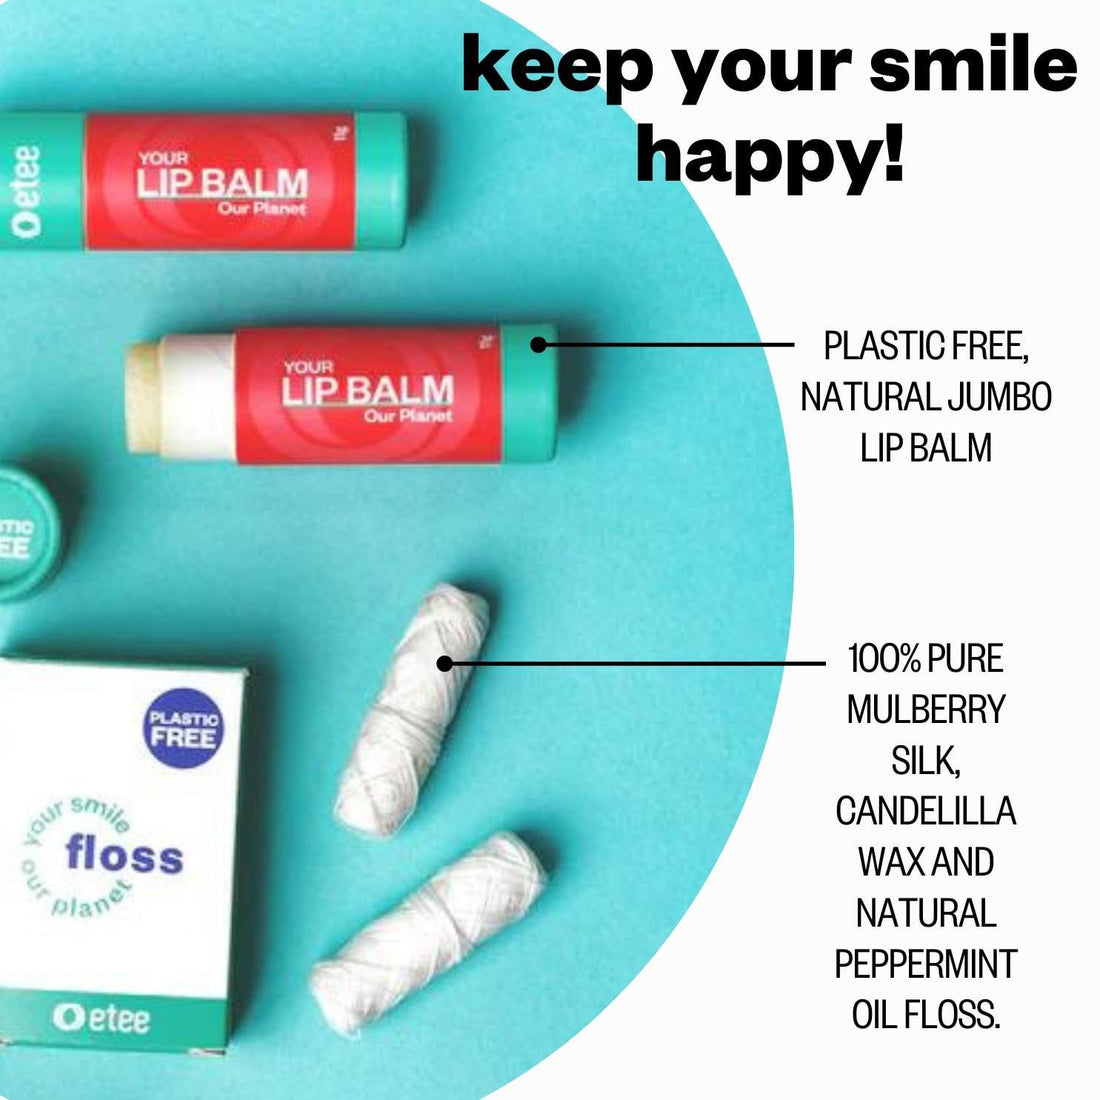 Infographic of etee's smile refills including lip balm and dental floss. The heading reads "keep your smile happy" and the text says "plastic free, natural jumbo lip balm" and "100% pure mulberry silk, candelilla wax and natural peppermint oil floss"